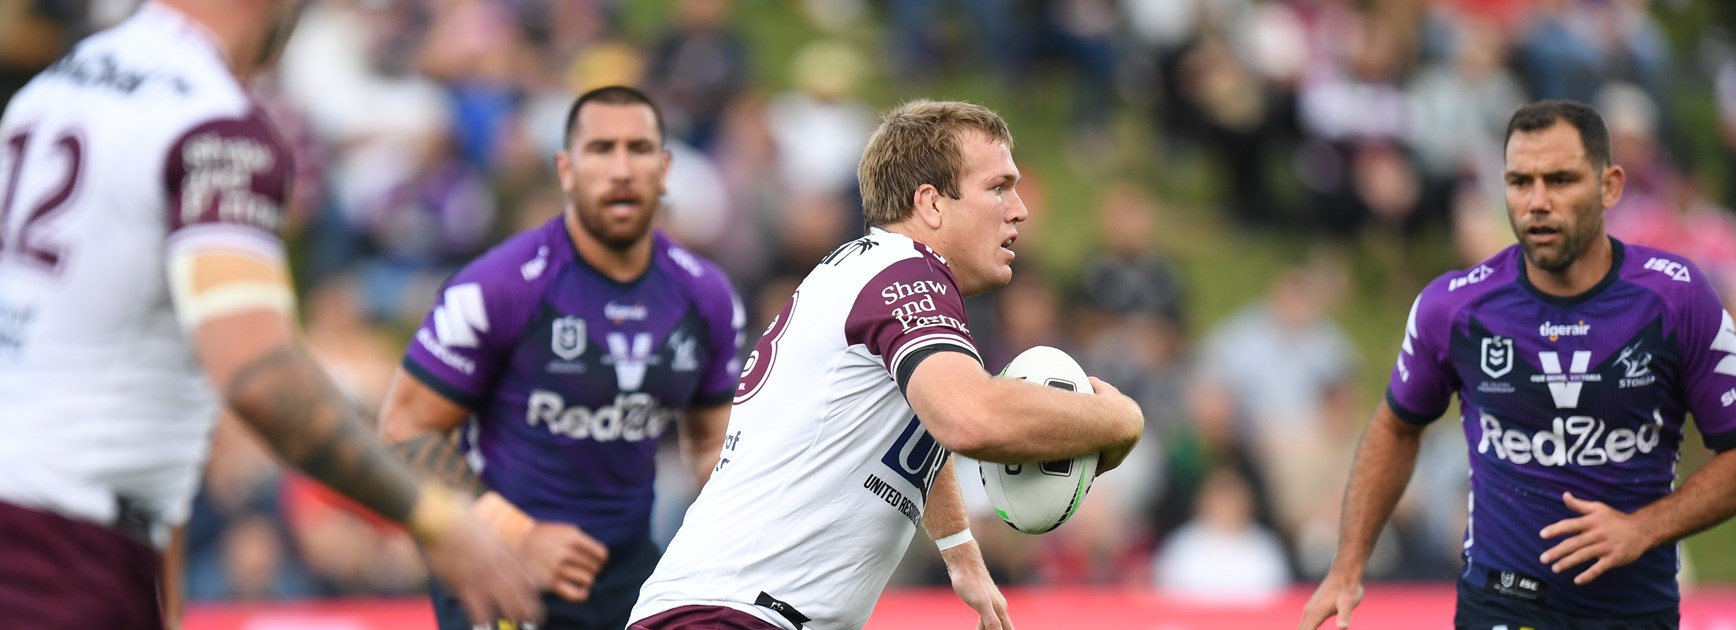 Sea Eagles go down 30-6 to Storm